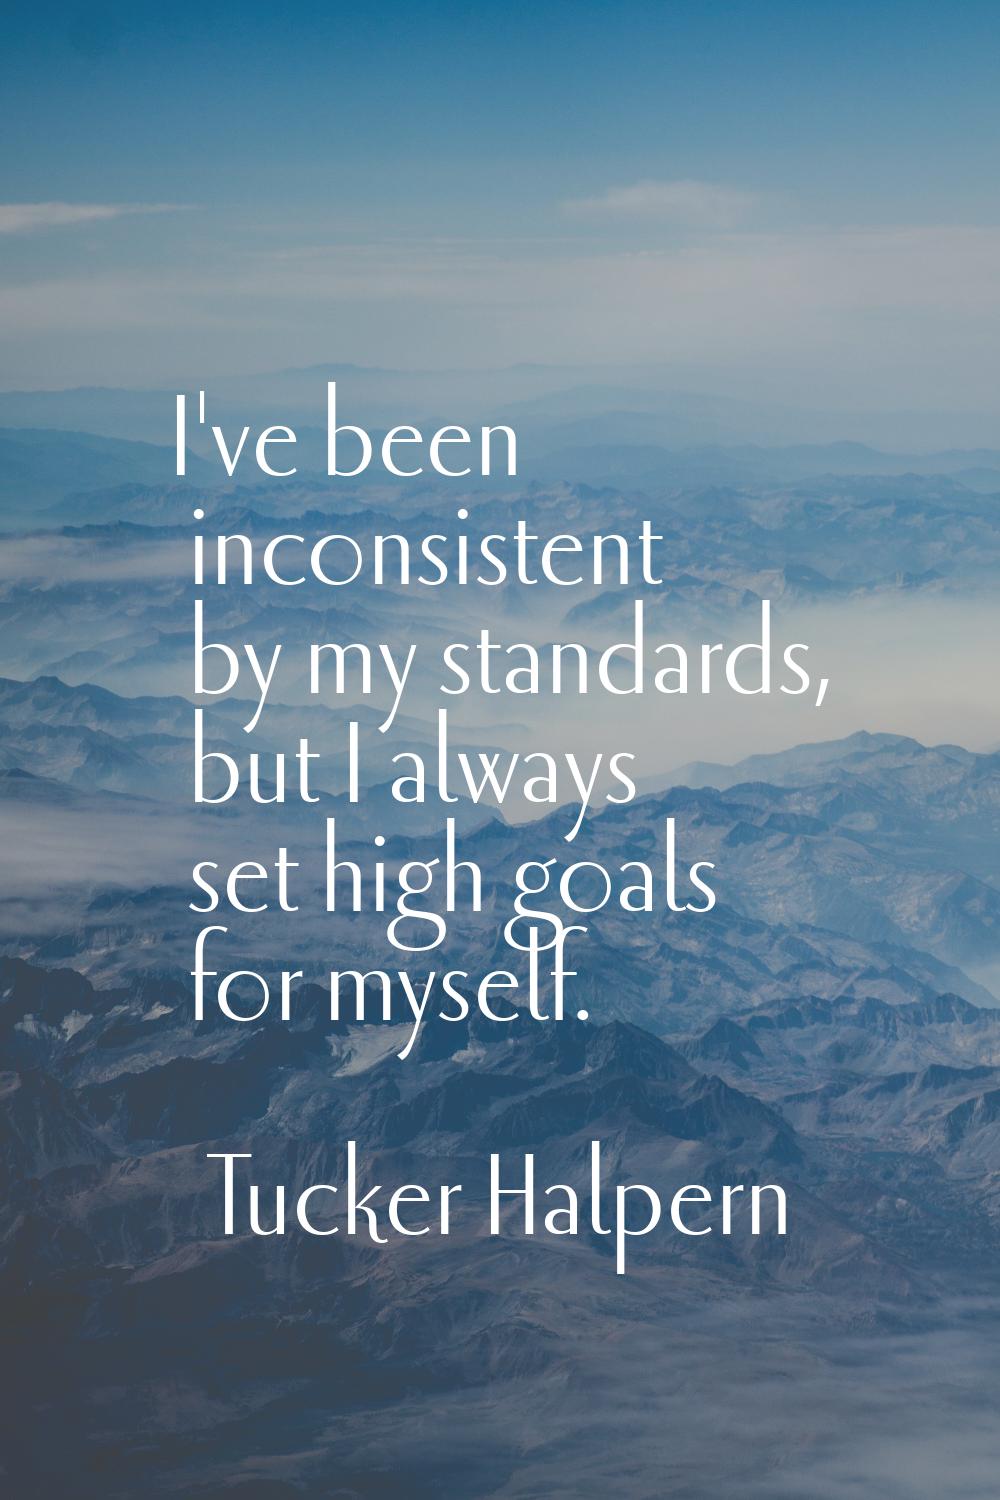 I've been inconsistent by my standards, but I always set high goals for myself.